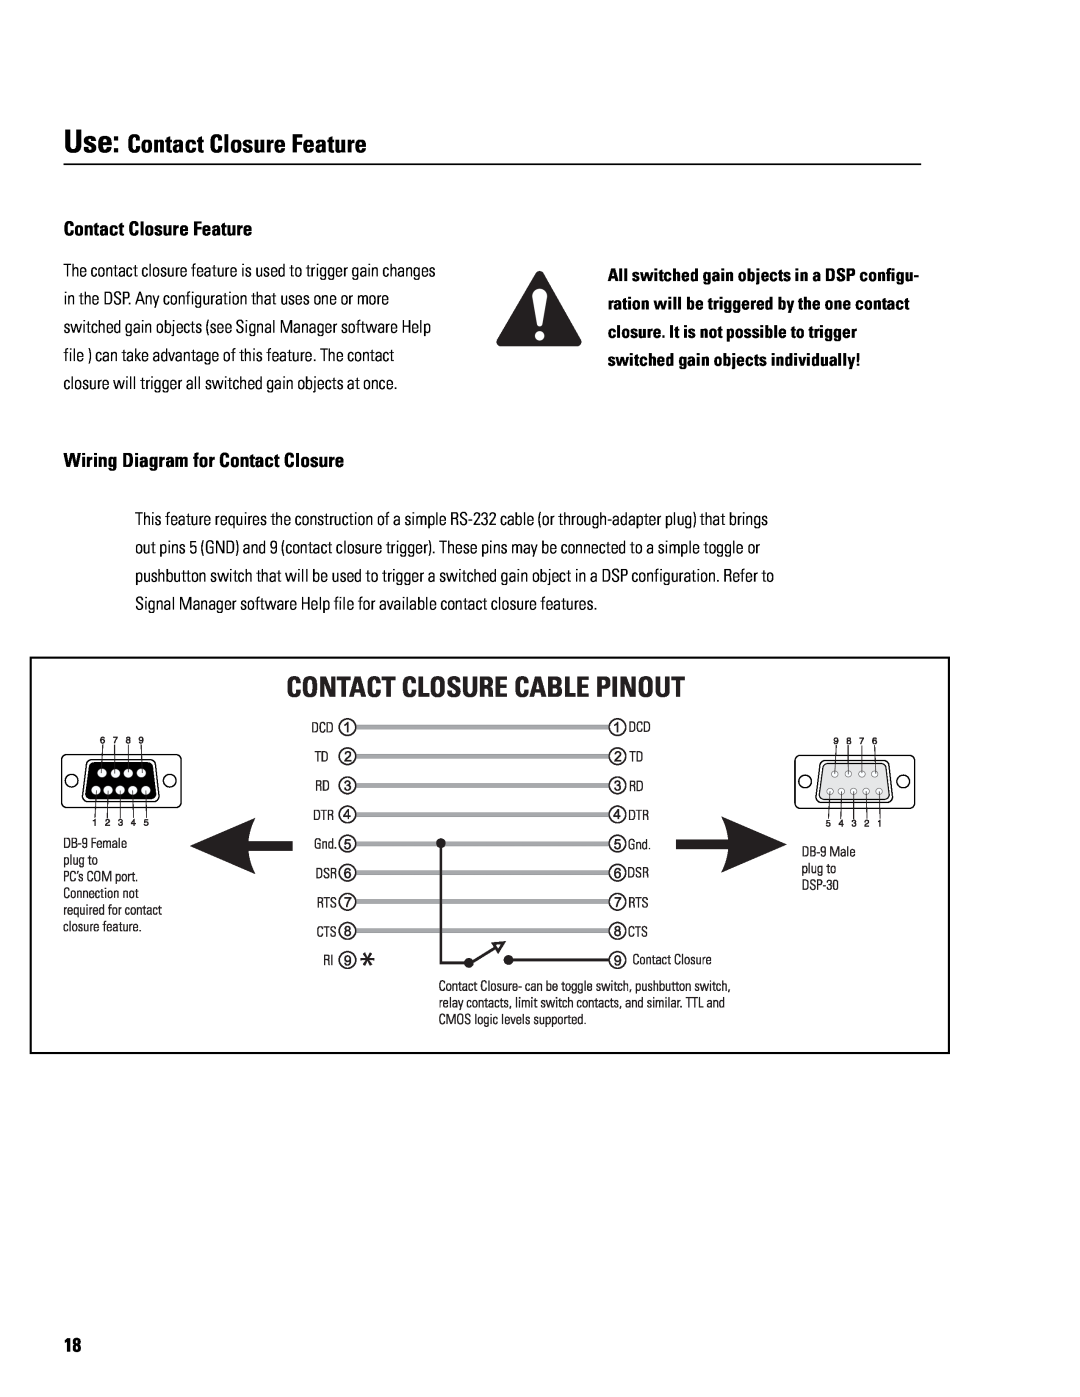 QSC Audio DSP-30 manual Use Contact Closure Feature, Wiring Diagram for Contact Closure 